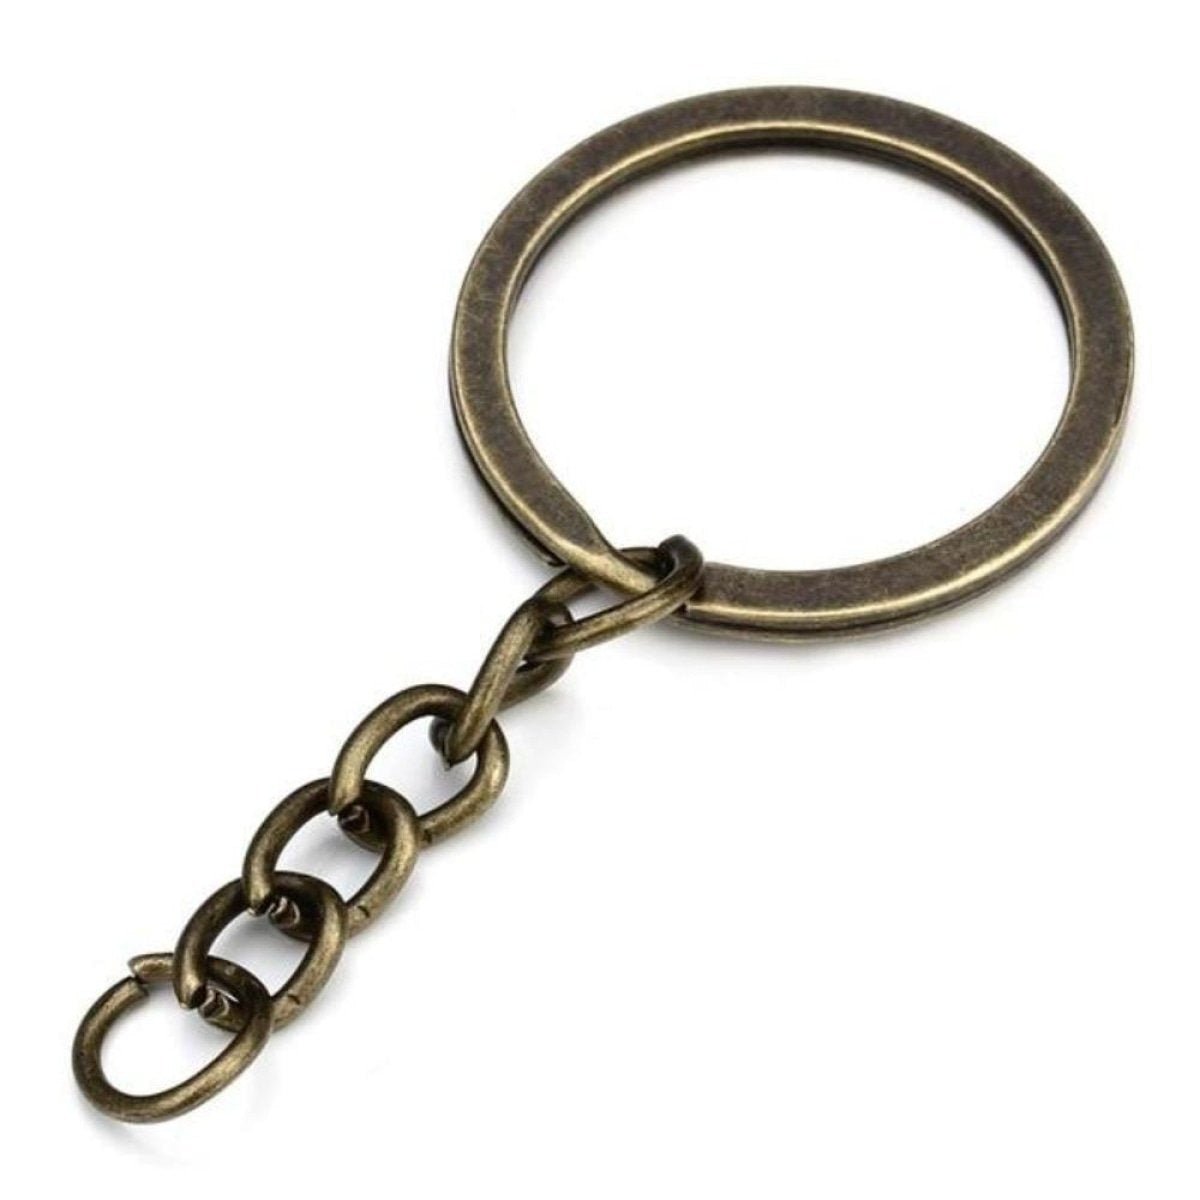 100pcs 25mm Gold Ancient Keyring Keychain Split Ring Chain Key Rings Key Chains - Antique Bronze - - Asia Sell